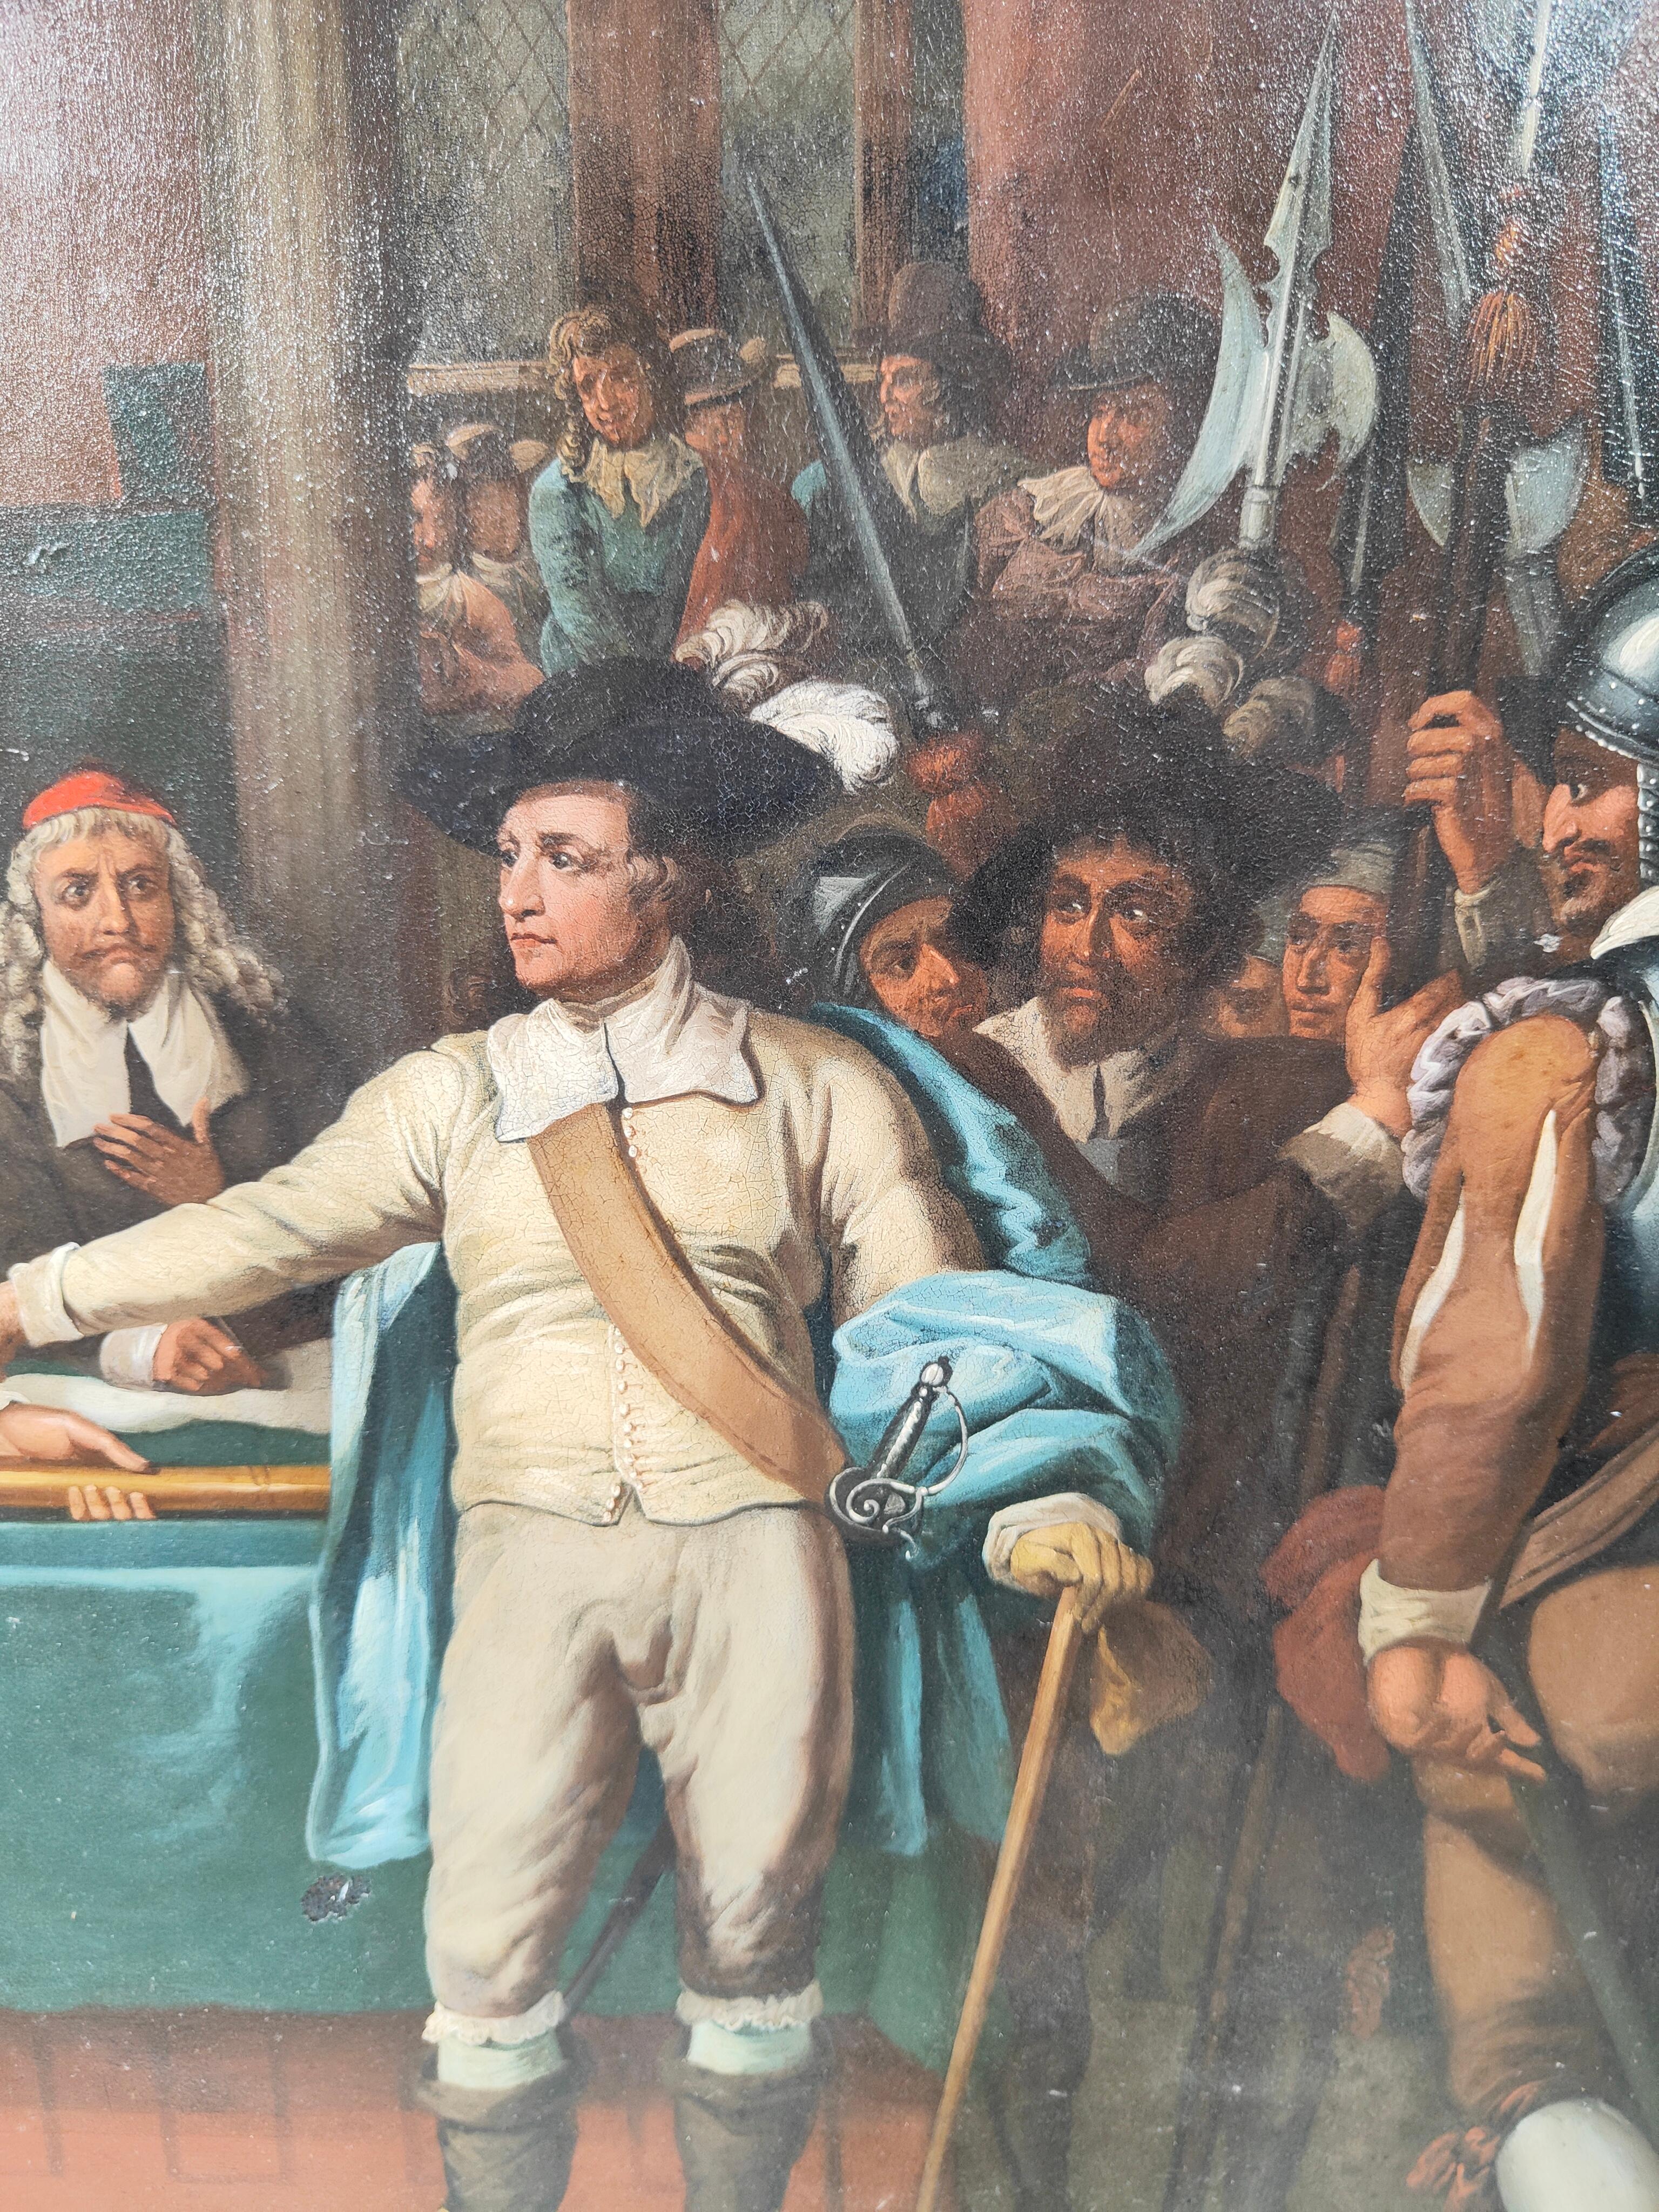 This significant oil painting on copper represents a notable example of the North American School in the late 18th century. The artwork captures the essence of the time, marked by crucial events in the history of North America.

In this 55 x 74.5 cm